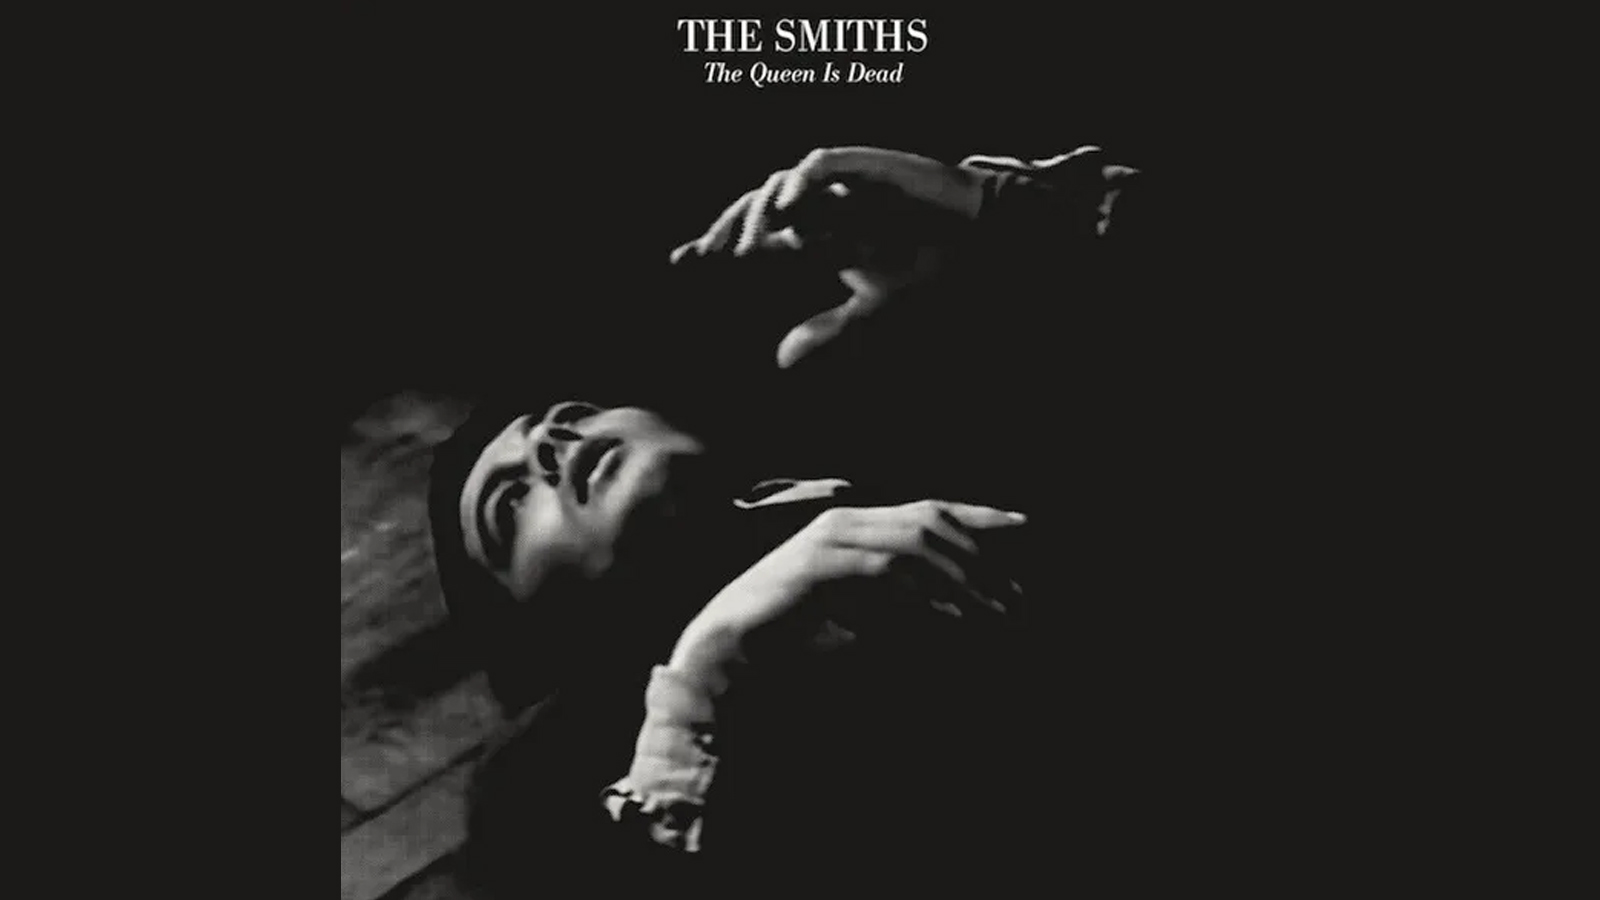 the cover art for the smiths' the queen is dead